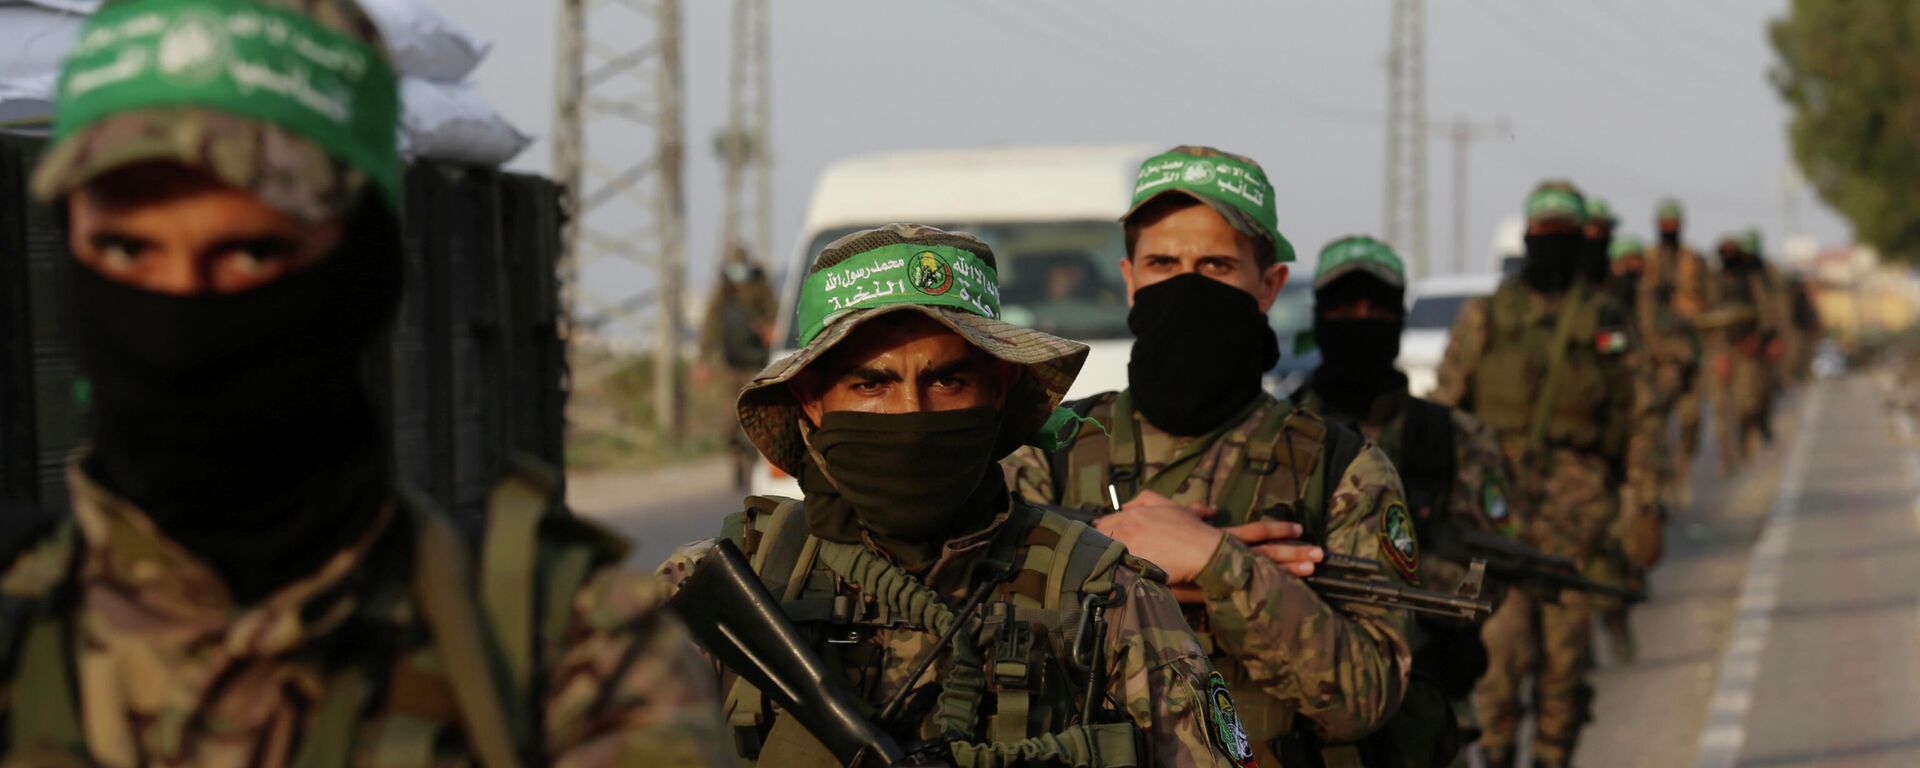 Masked militants from the Izzedine al-Qassam Brigades, a military wing of Hamas, march with their rifles along the main road of the Nusseirat refugee camp, central Gaza Strip, Thursday, 28 October 2021. - Sputnik International, 1920, 31.03.2022